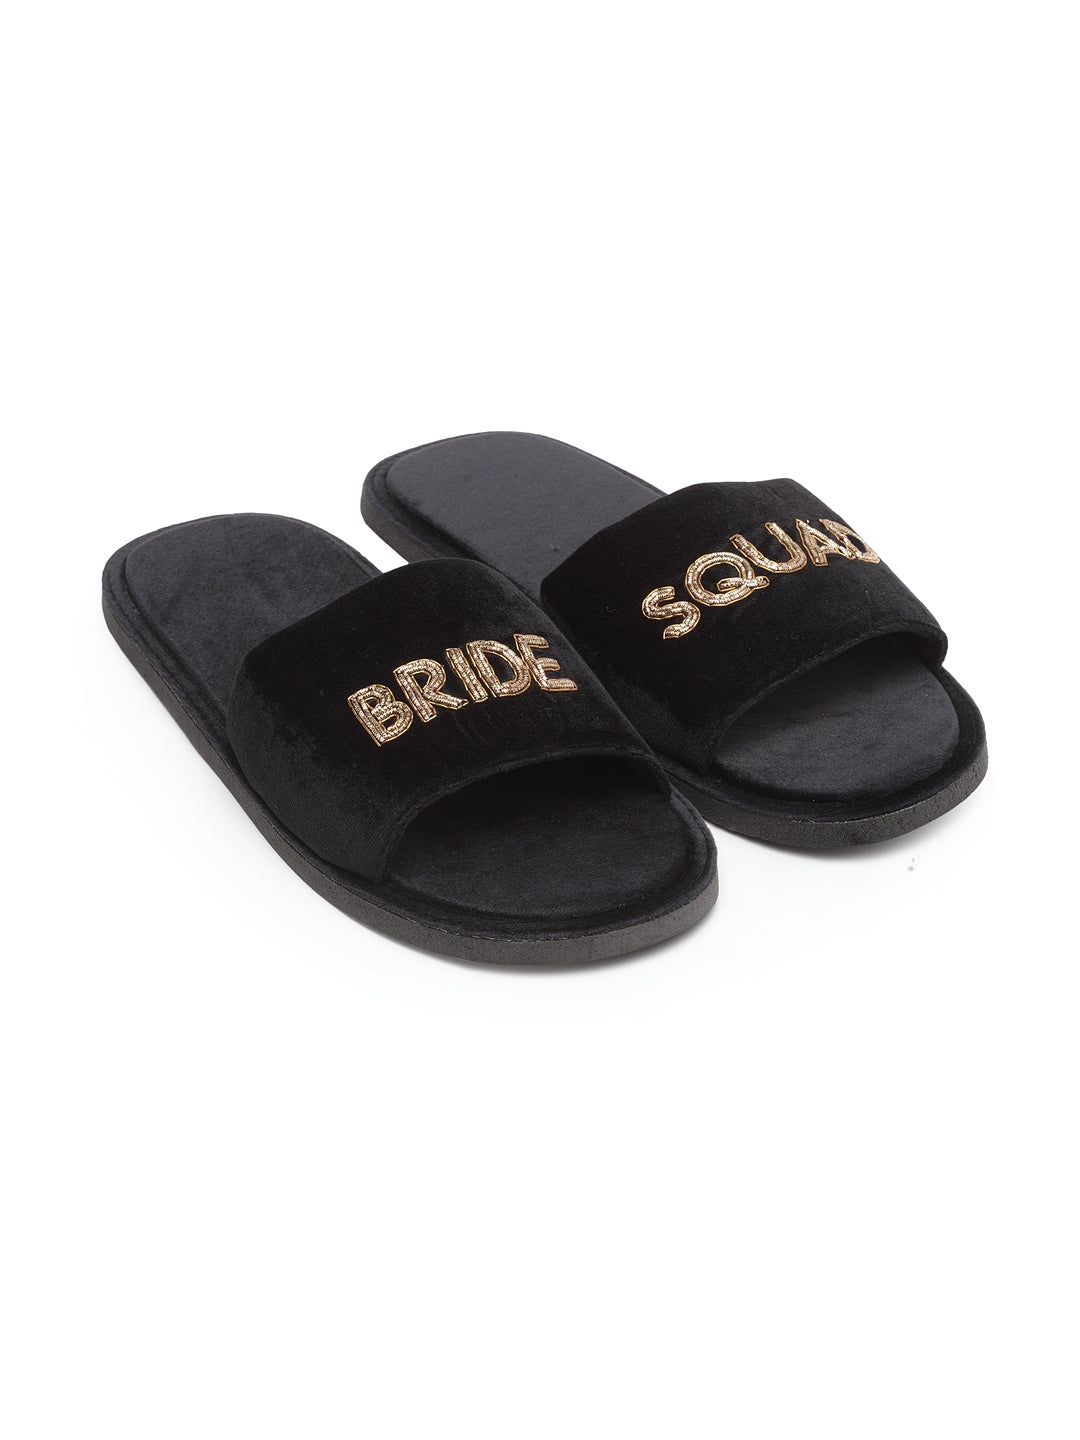 Men Customized Wedding Domani Slippers (Made To Order)